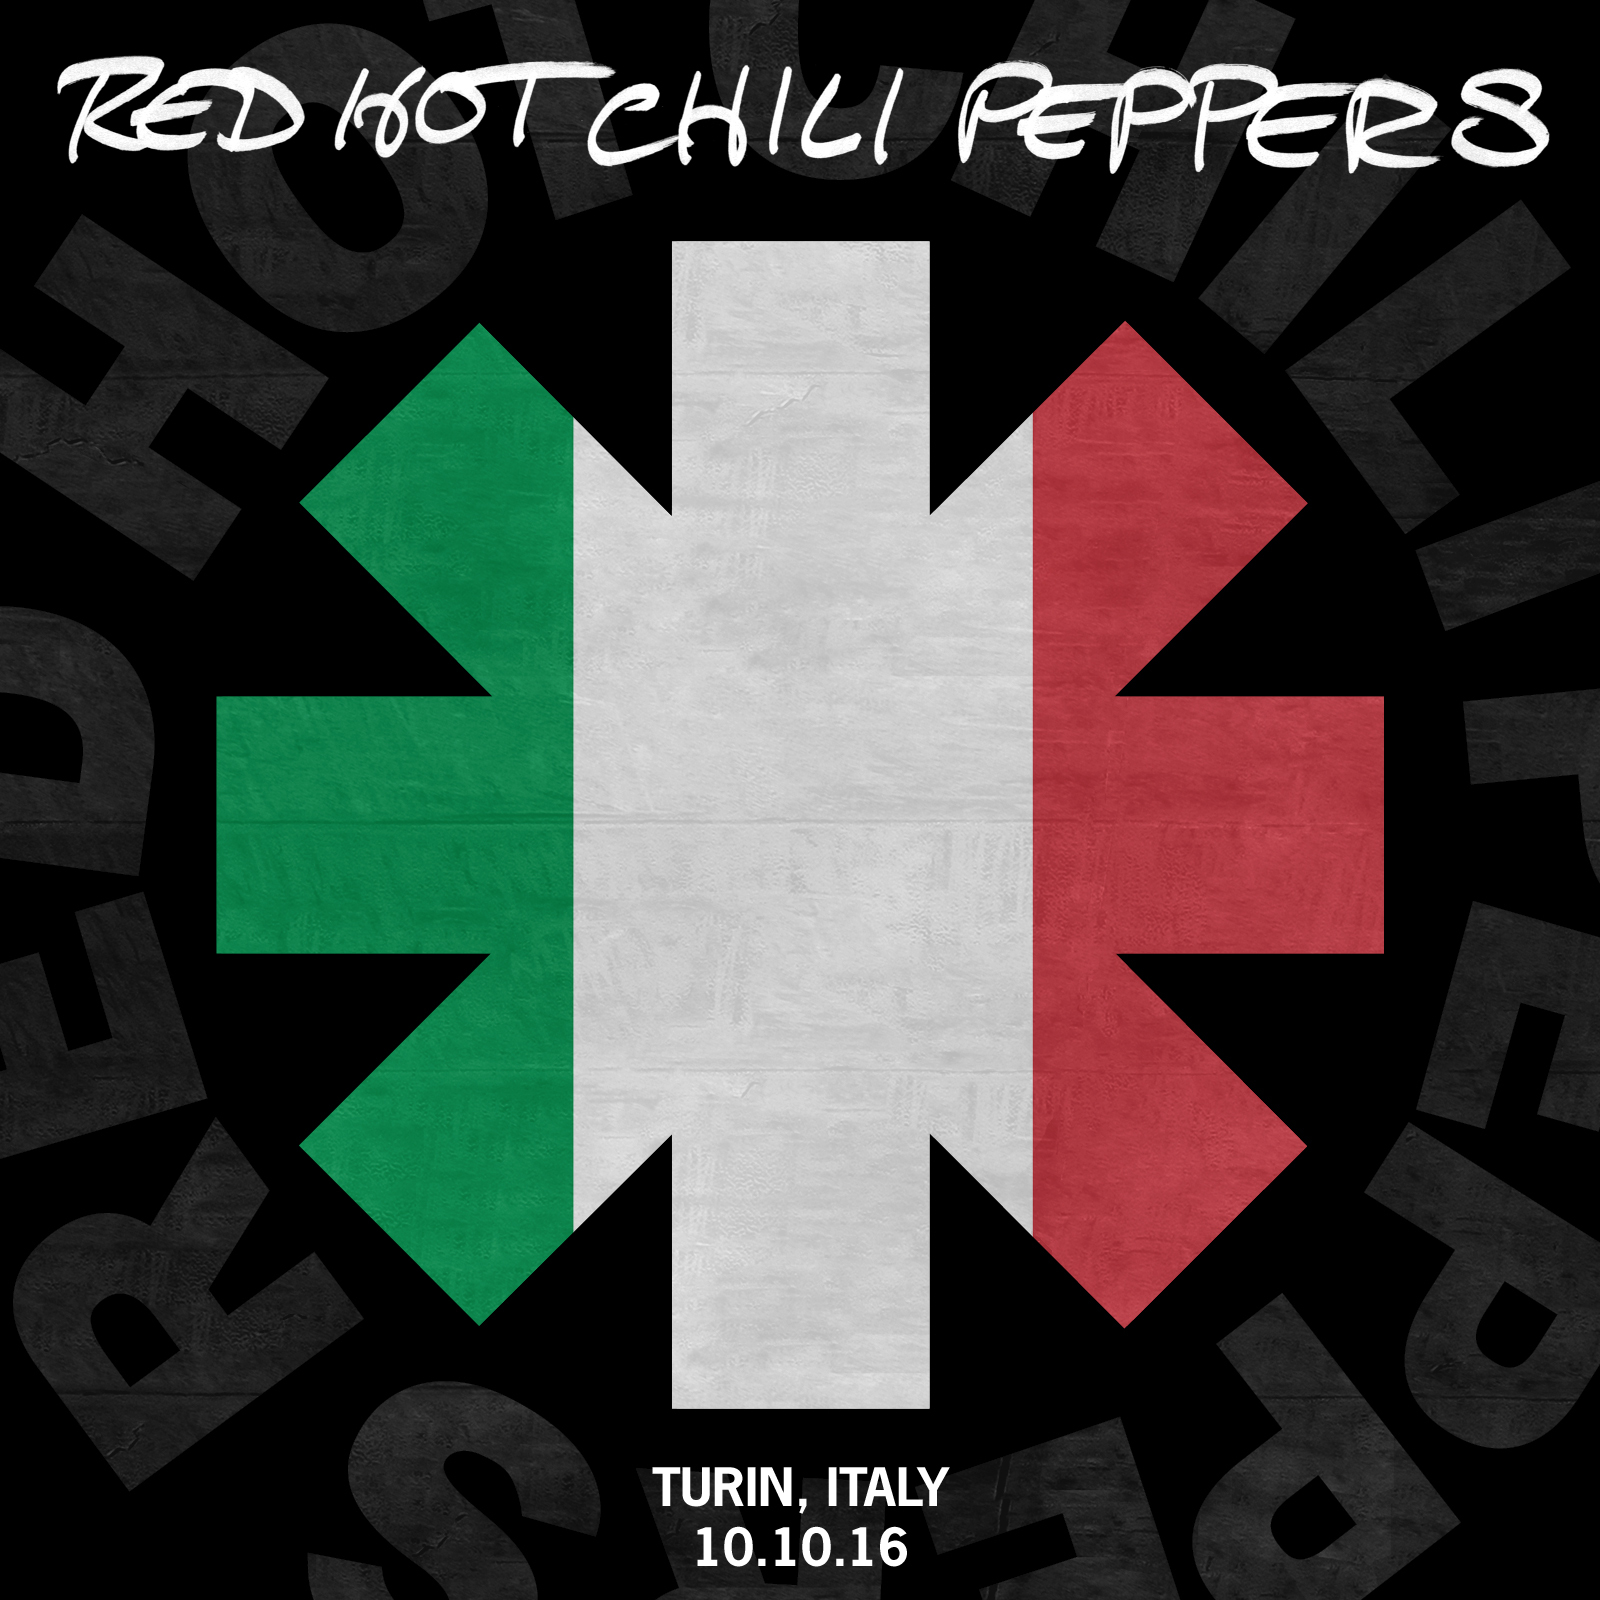 Red Hot Chili Peppers - 2016/10/10 Torino, IT (2016) [FLAC 24bit/48kHz]